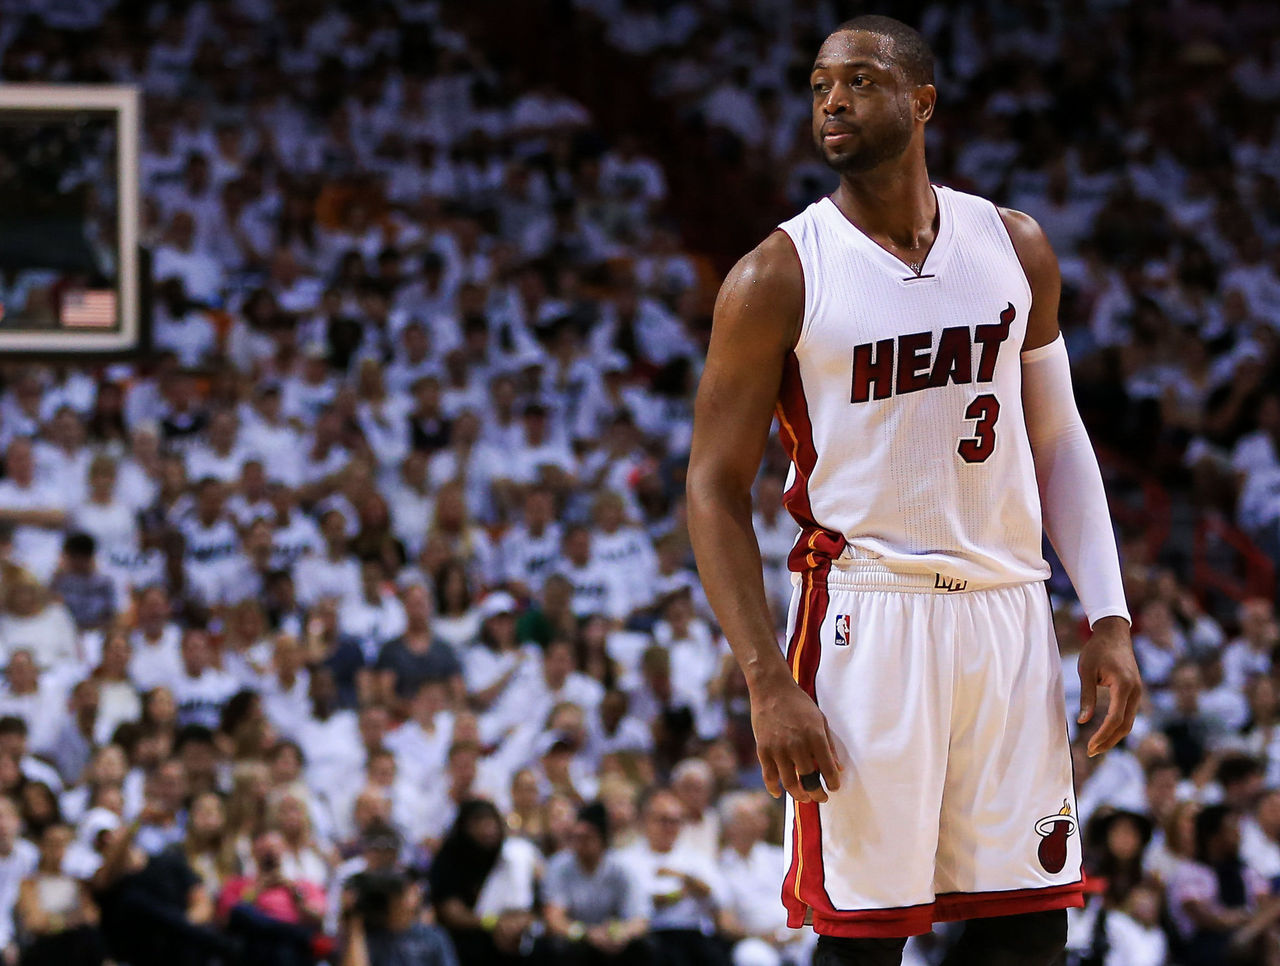 Dwyane Wade’s 30 Points Lead Heat to Overtime Victory in Game 4